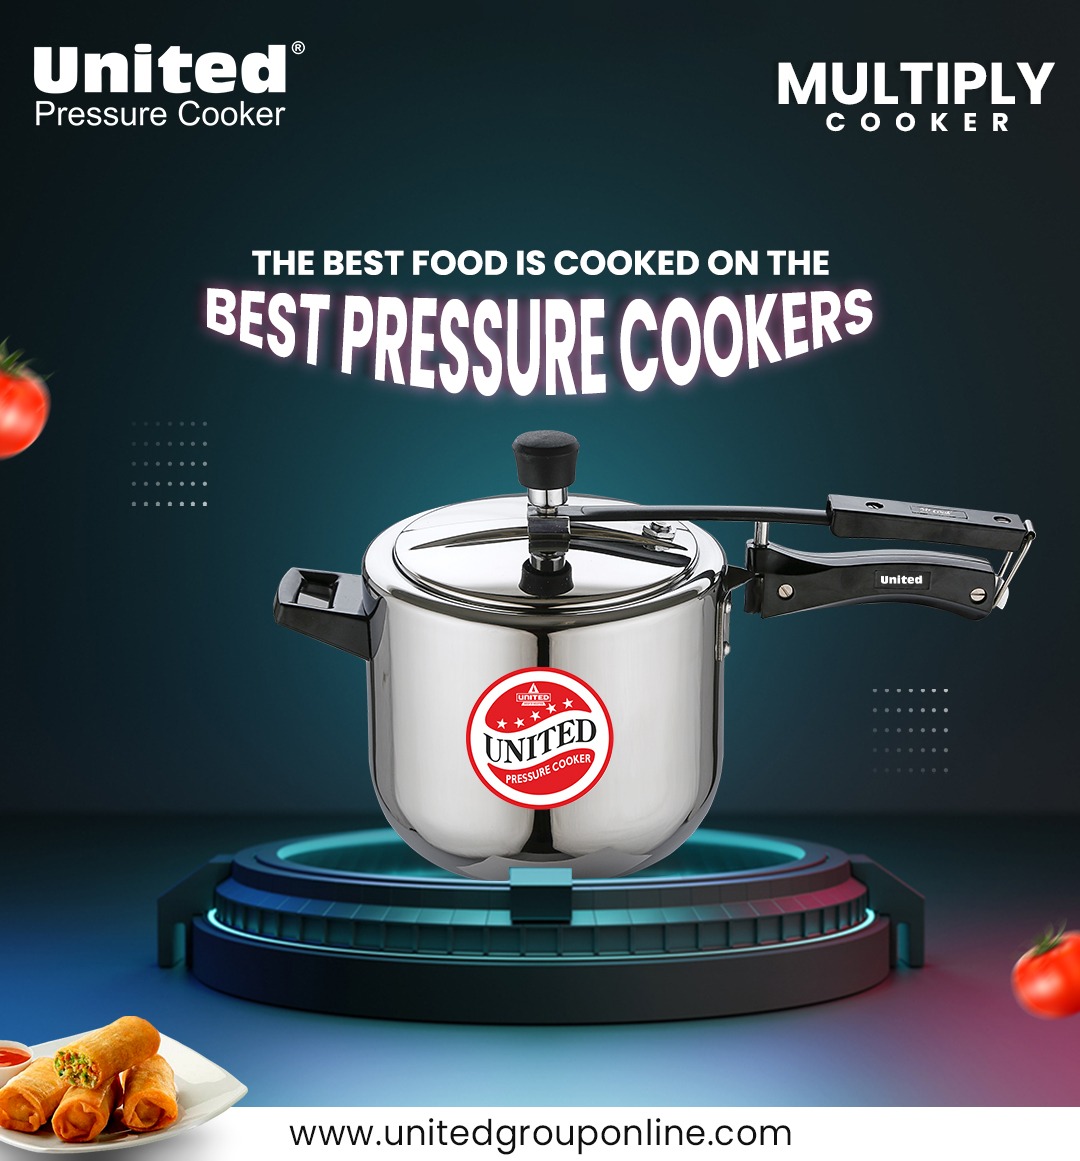 The best food is cooked on the best pressure cookers....
.
.
.
#United #Cookers #Cookware #PressureCookers #HealthyCooking #Deep #roundedkadai
#RoundedTawa #Wok #Stwe #Pot #StainlessSteel
#Durable #Reliable #PremiumQuality #Tastyfood #Chefchoice
#Qualityproduct